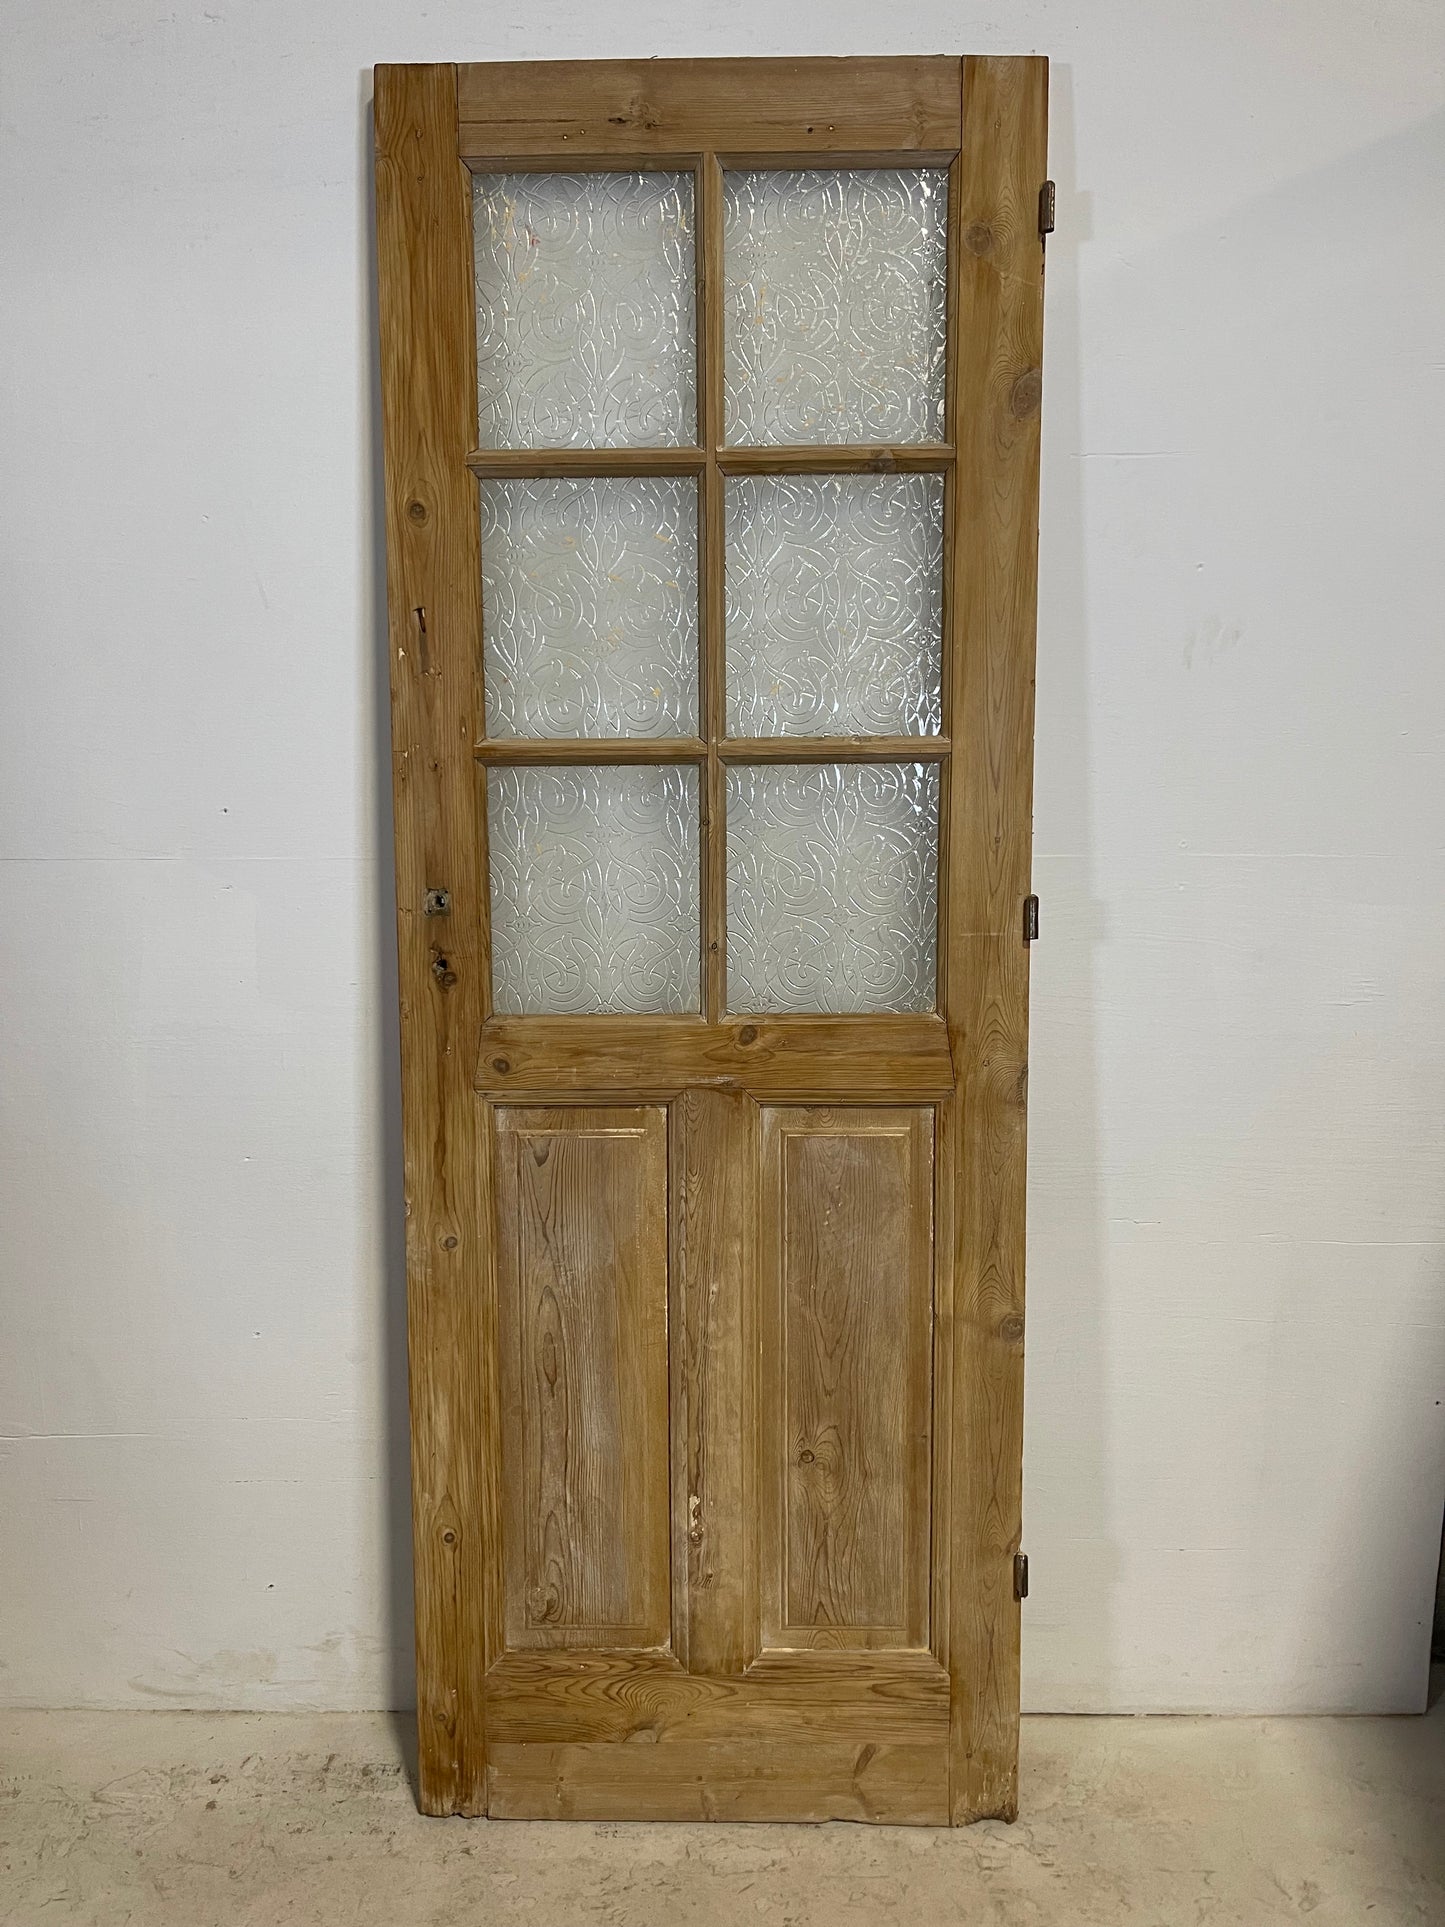 Antique French Panel Door with Glass  (83.75x30) L256